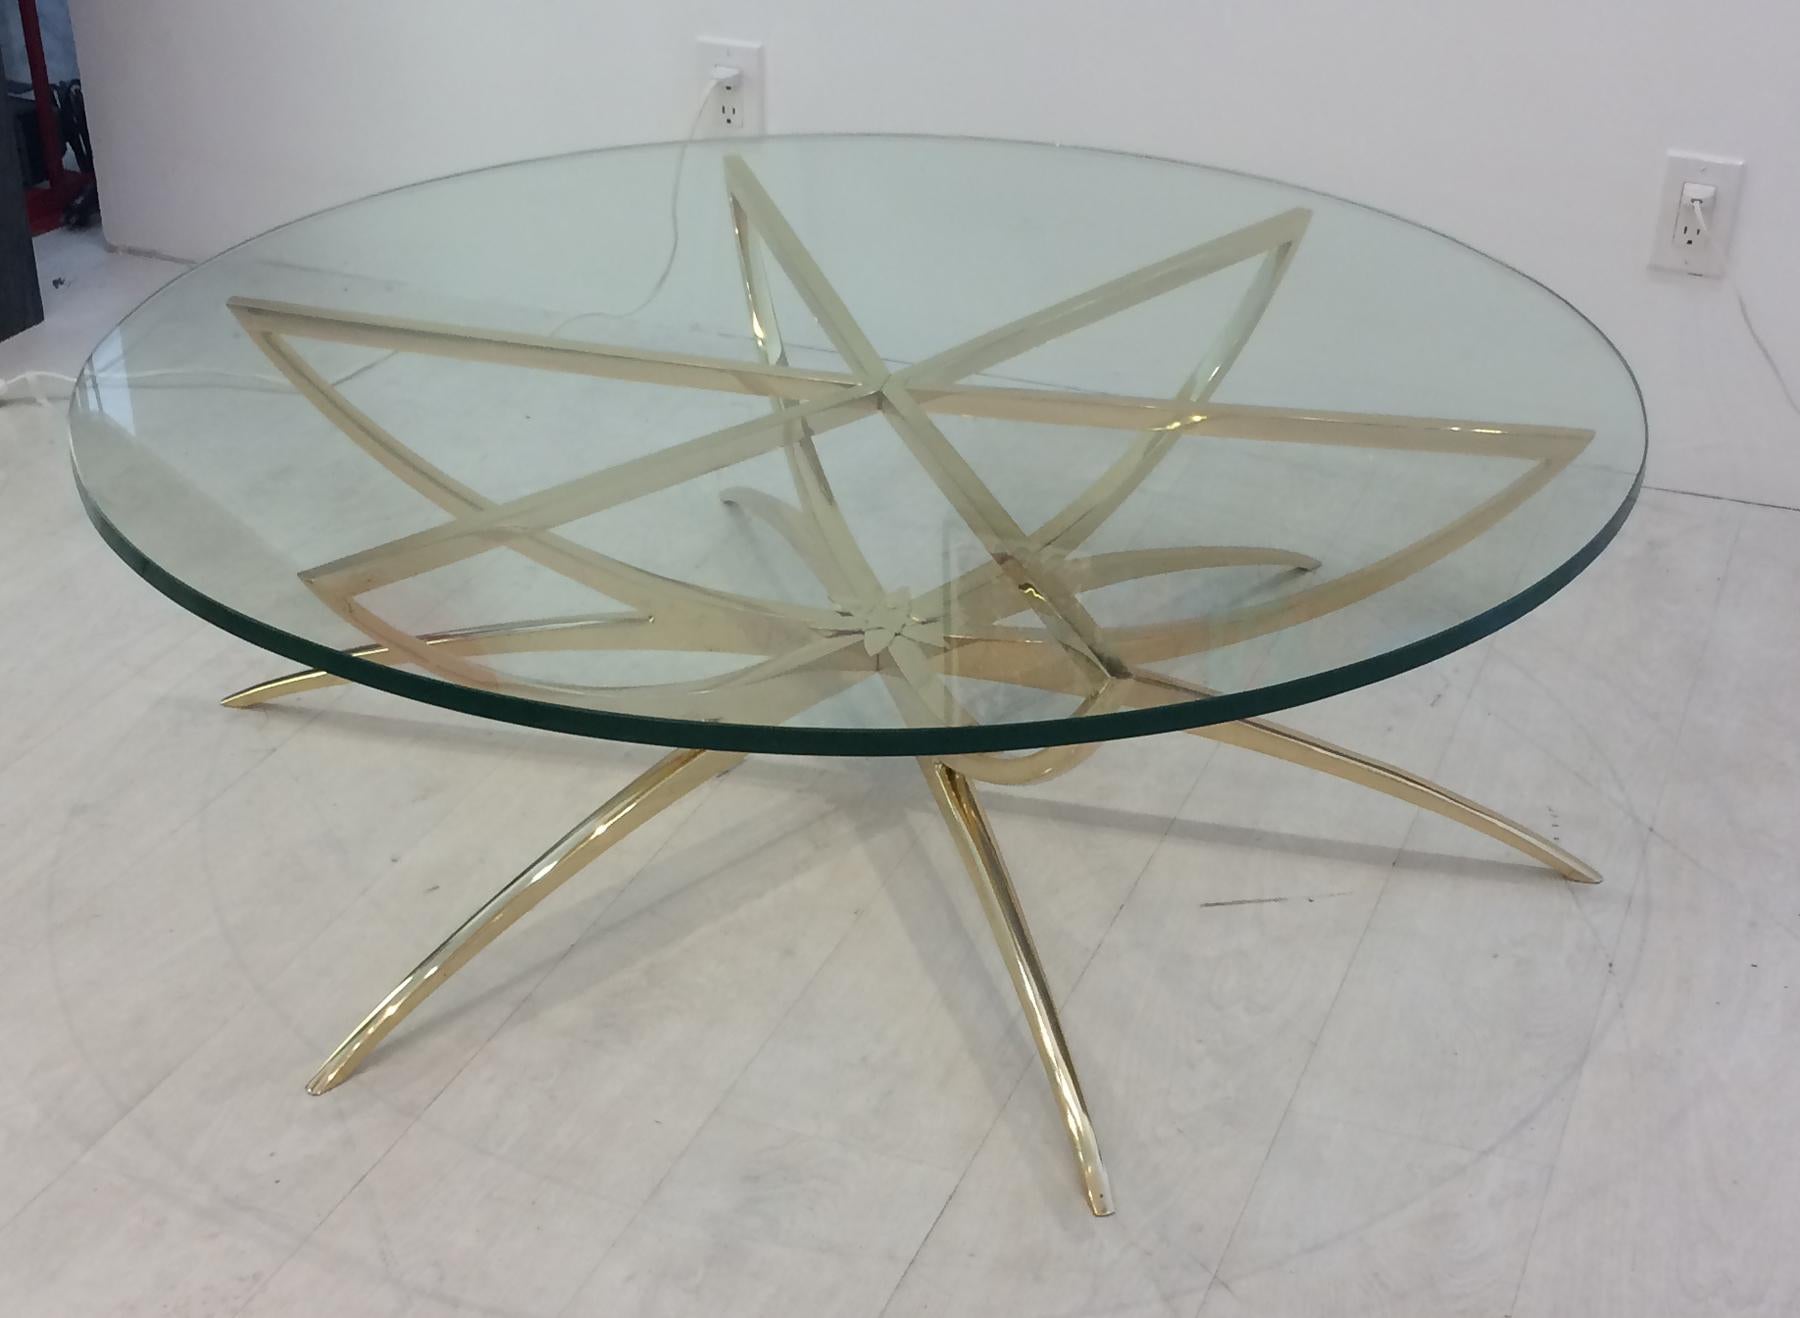 Cast 1970s Italian Brass Spider Based Cocktail Table